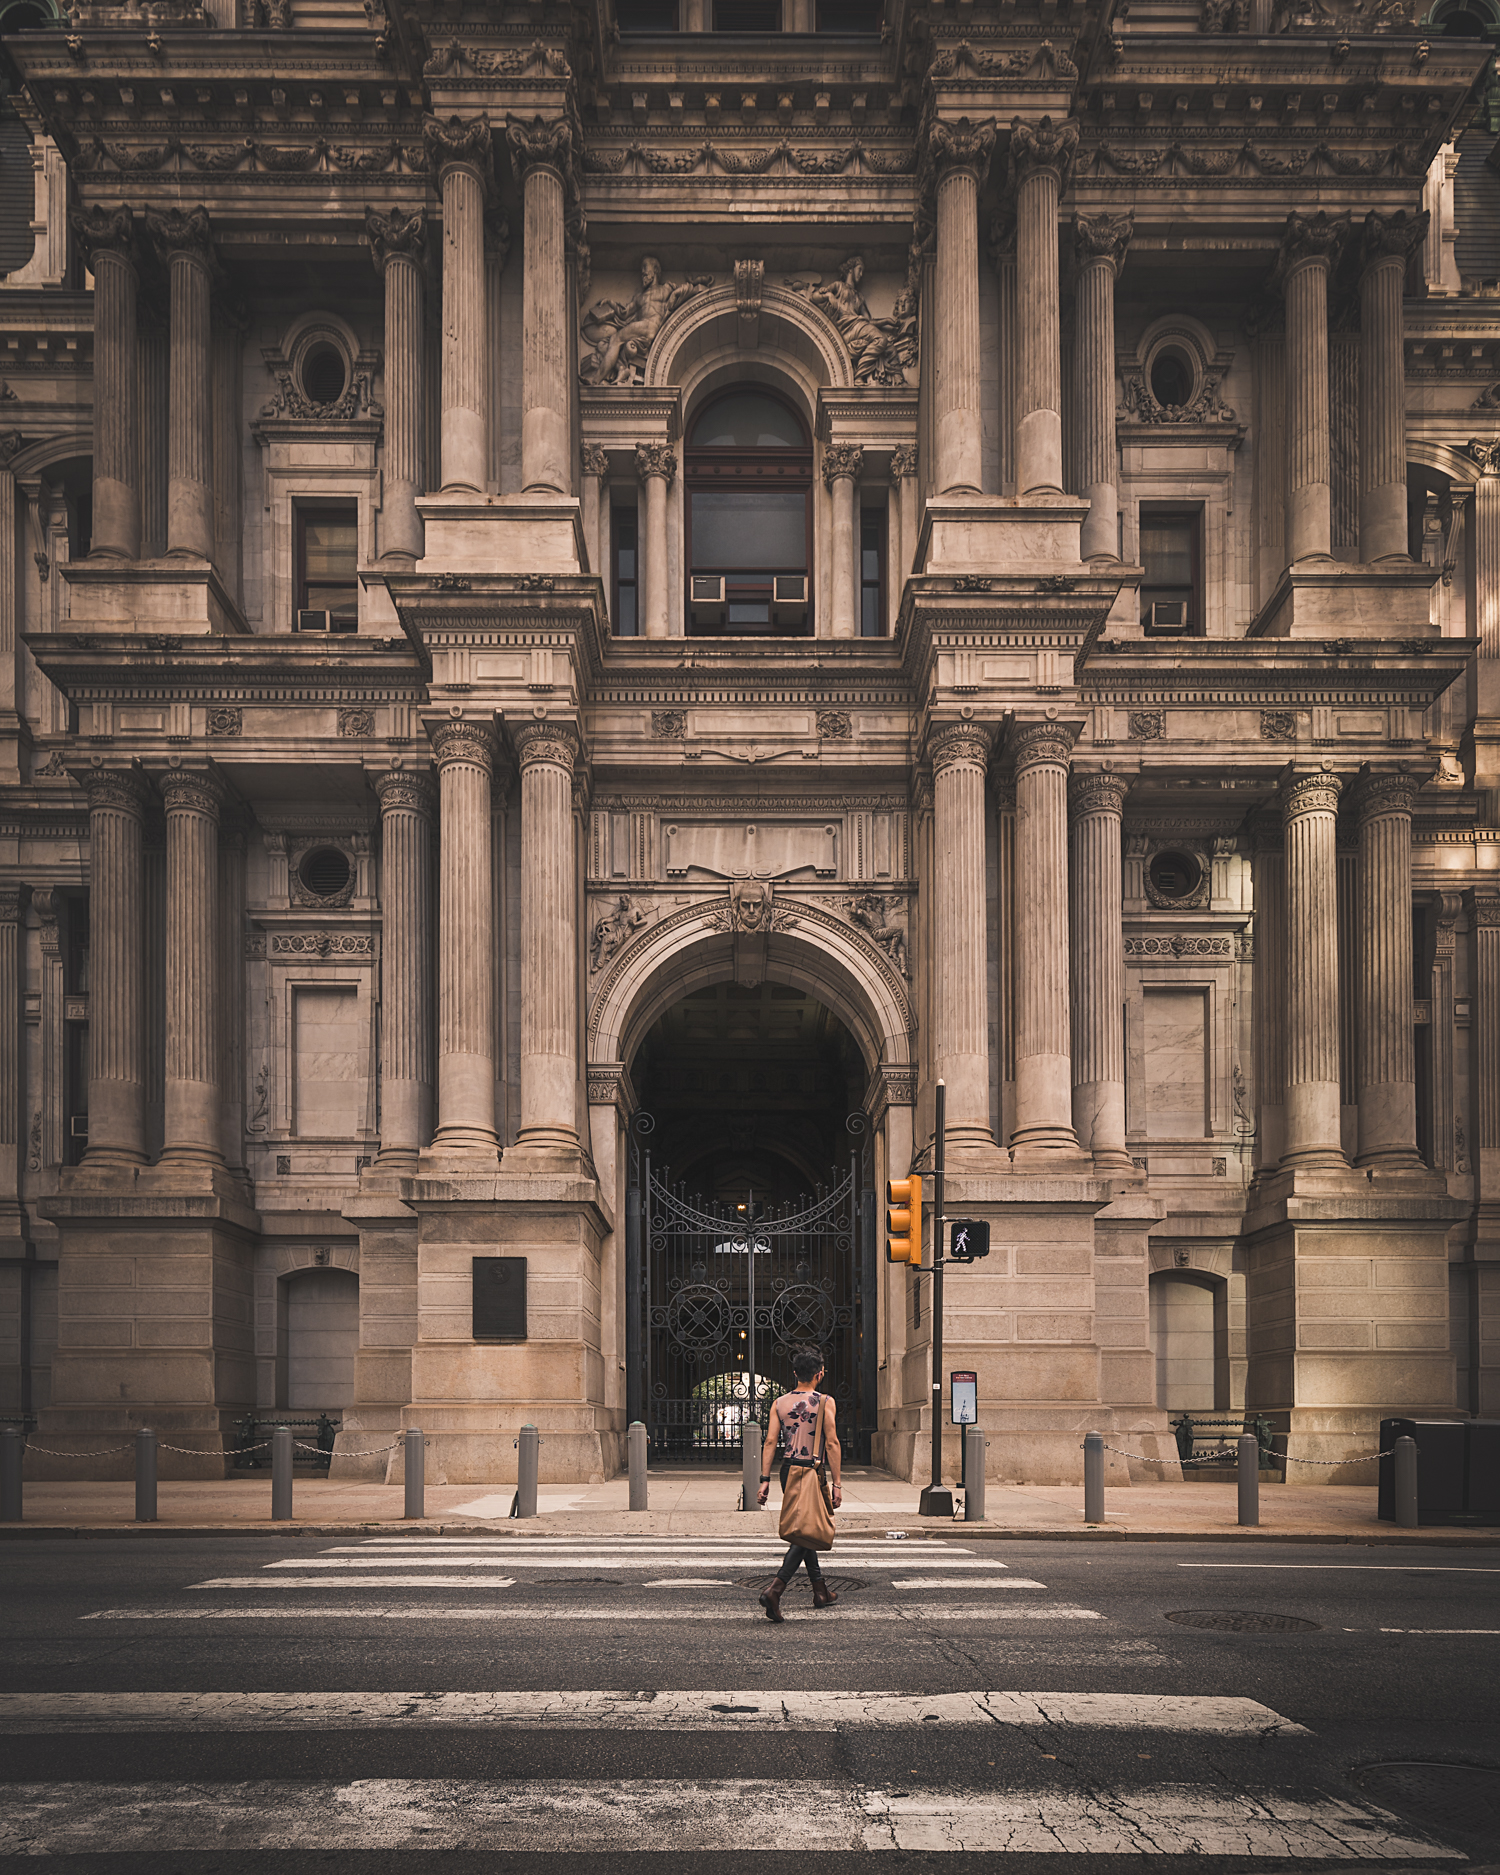 Man crossing the street in front of Philadelphia’ City Hall